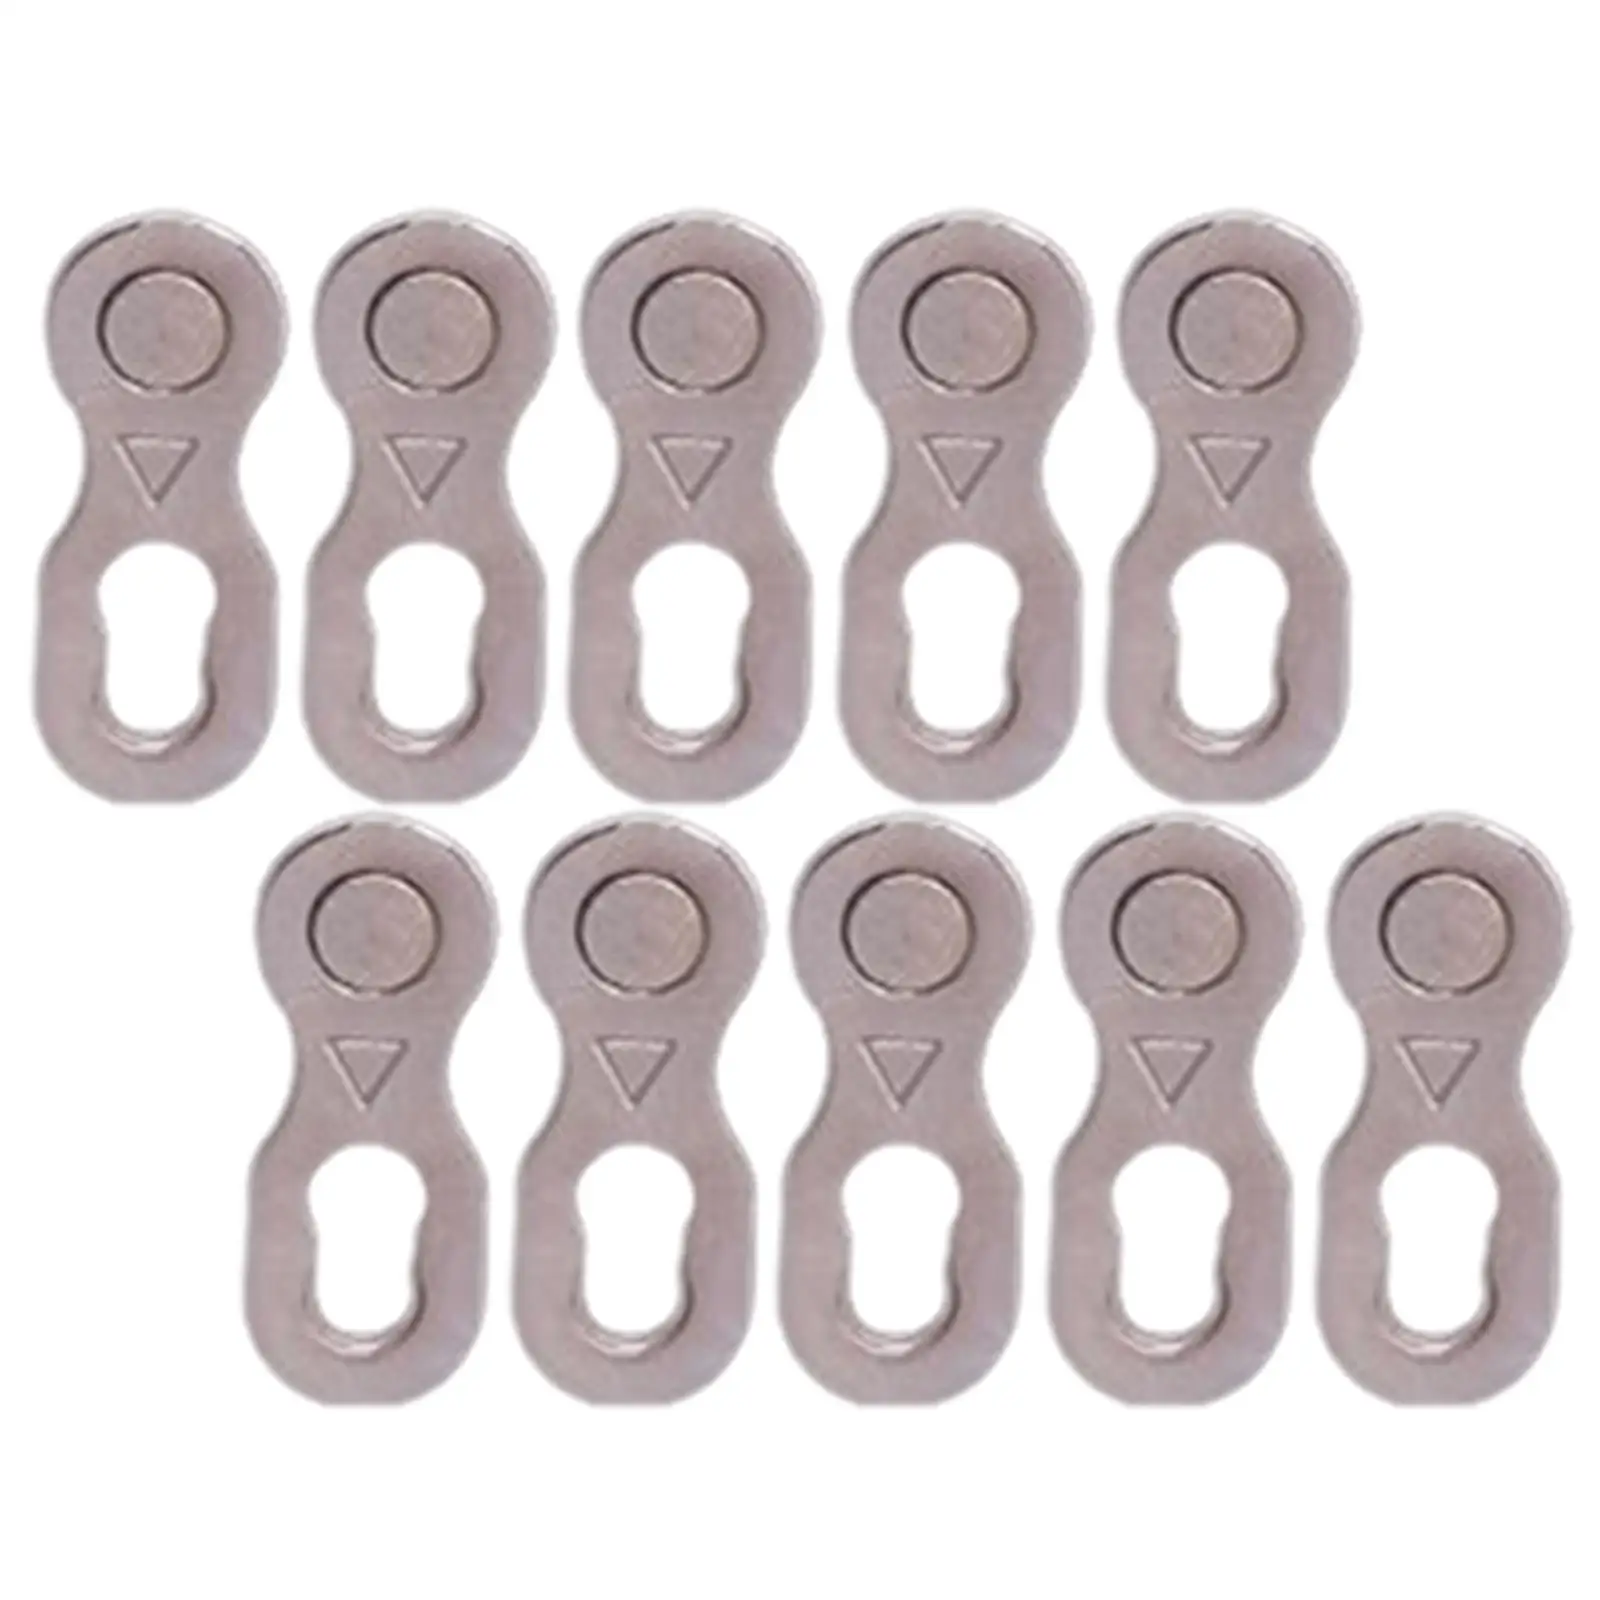 10Pcs Universal Chain  Bike Joint Connector  Chain Tool Repair Parts Reusable for 6 7 8 12  Chain